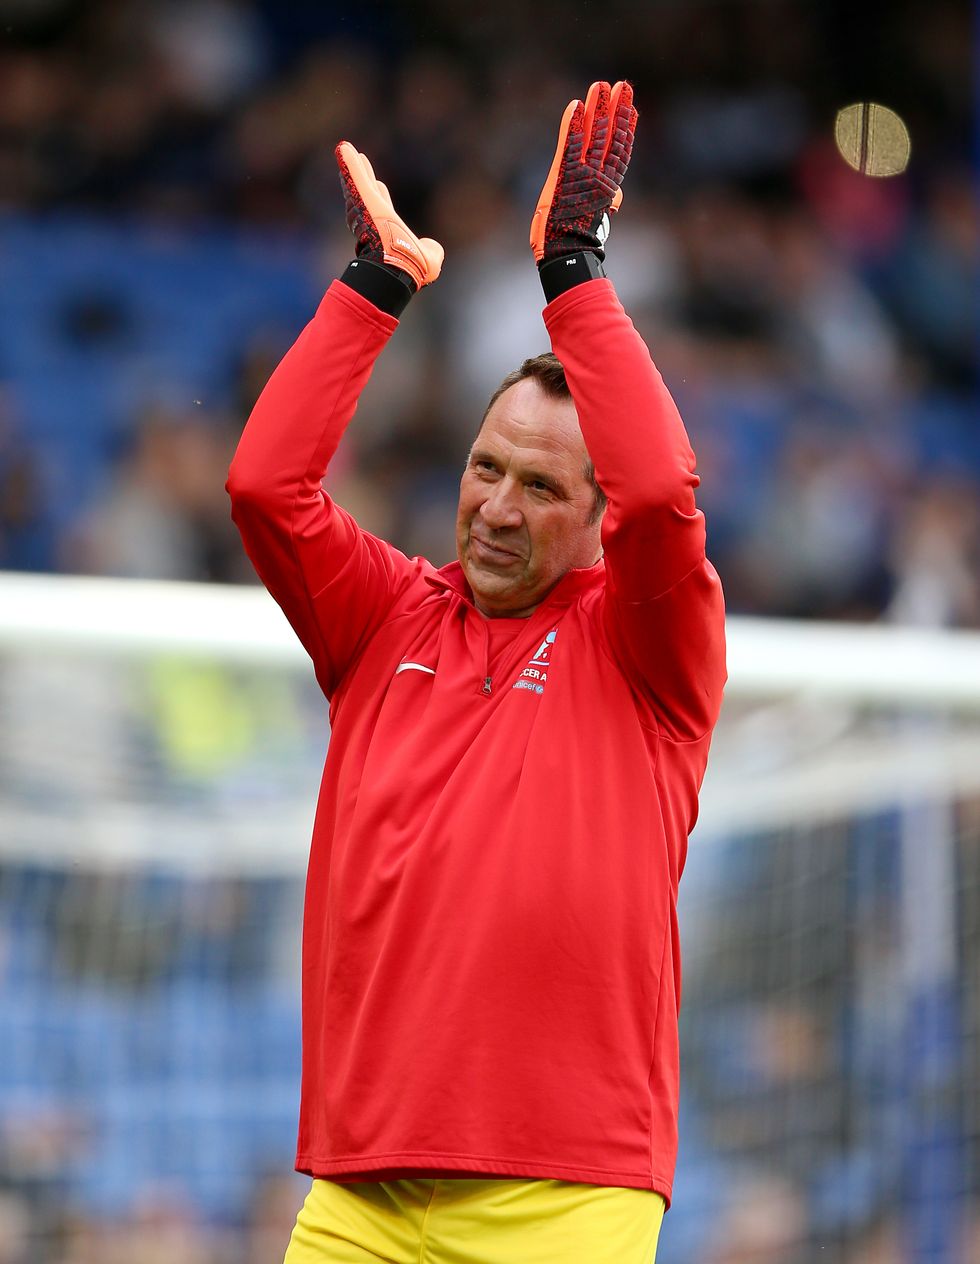 ‘I had a tear in my eye’ – David Seaman ‘so proud’ of Lionesses’ achievement